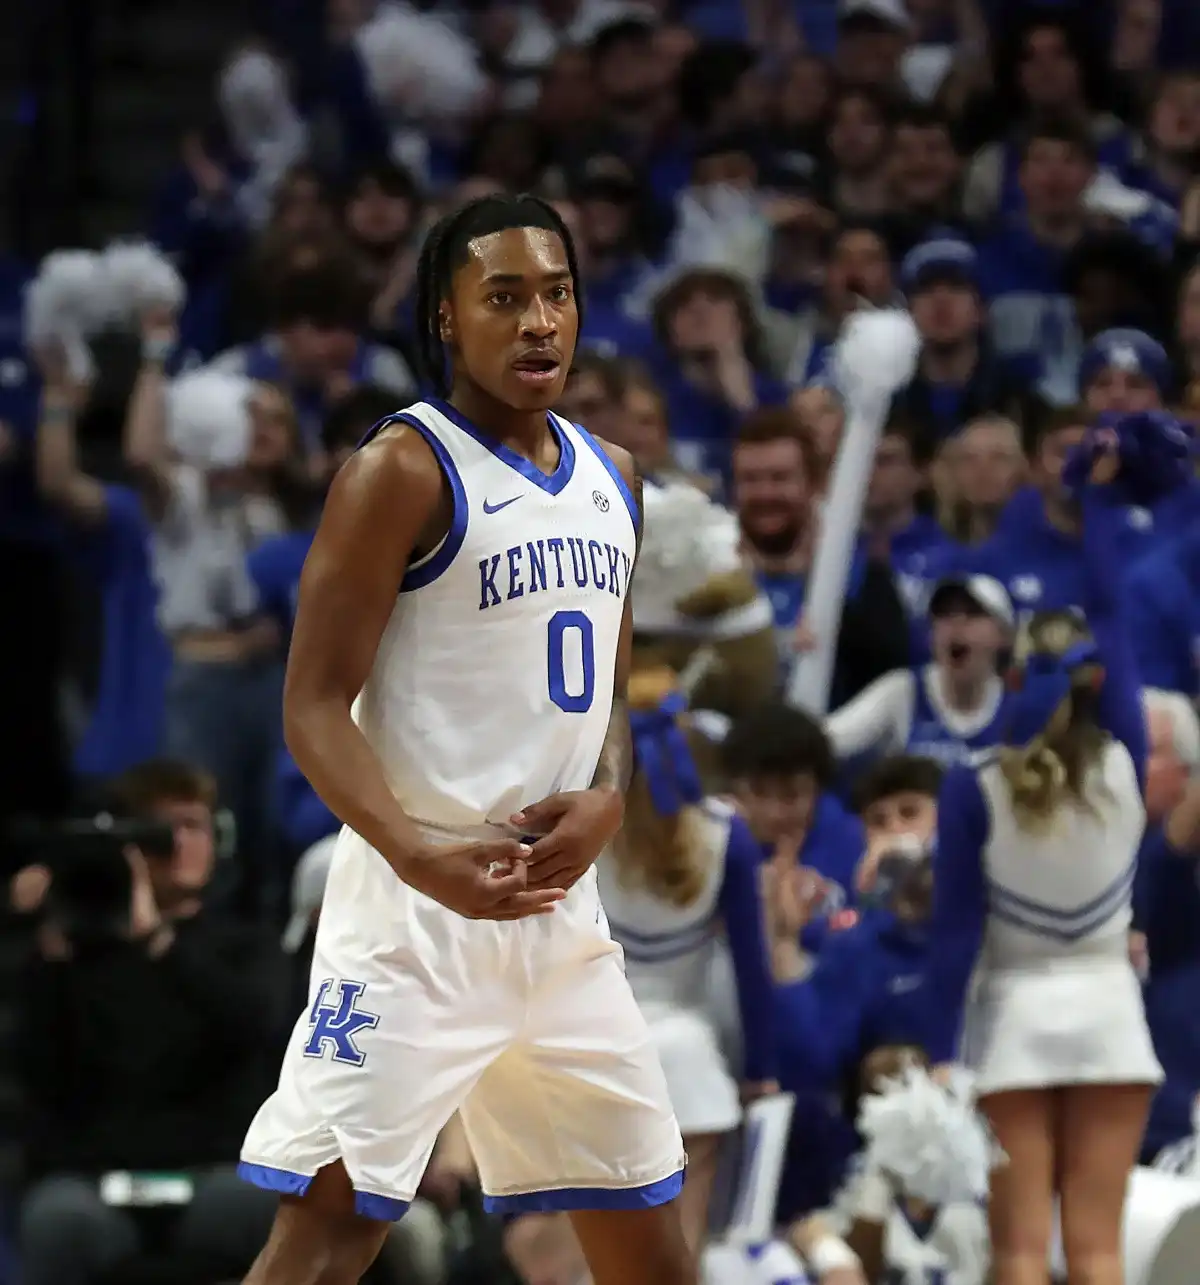 Kentucky basketball shows fight in second SEC victory over Missouri